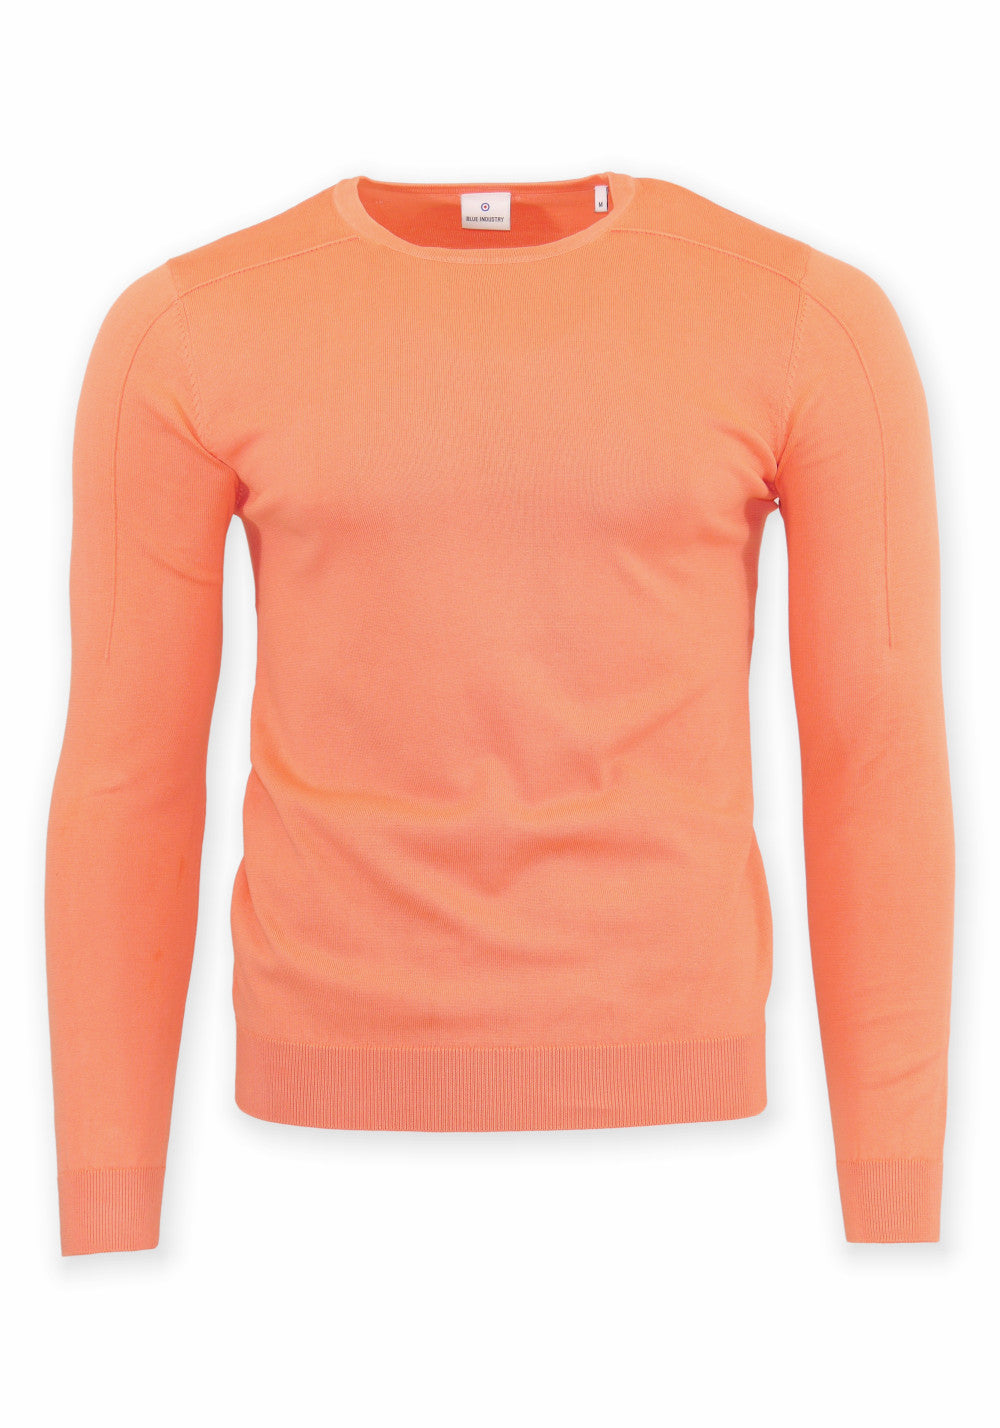 CREWNECK SWEATER (CORAL) - BLUE INDUSTRY